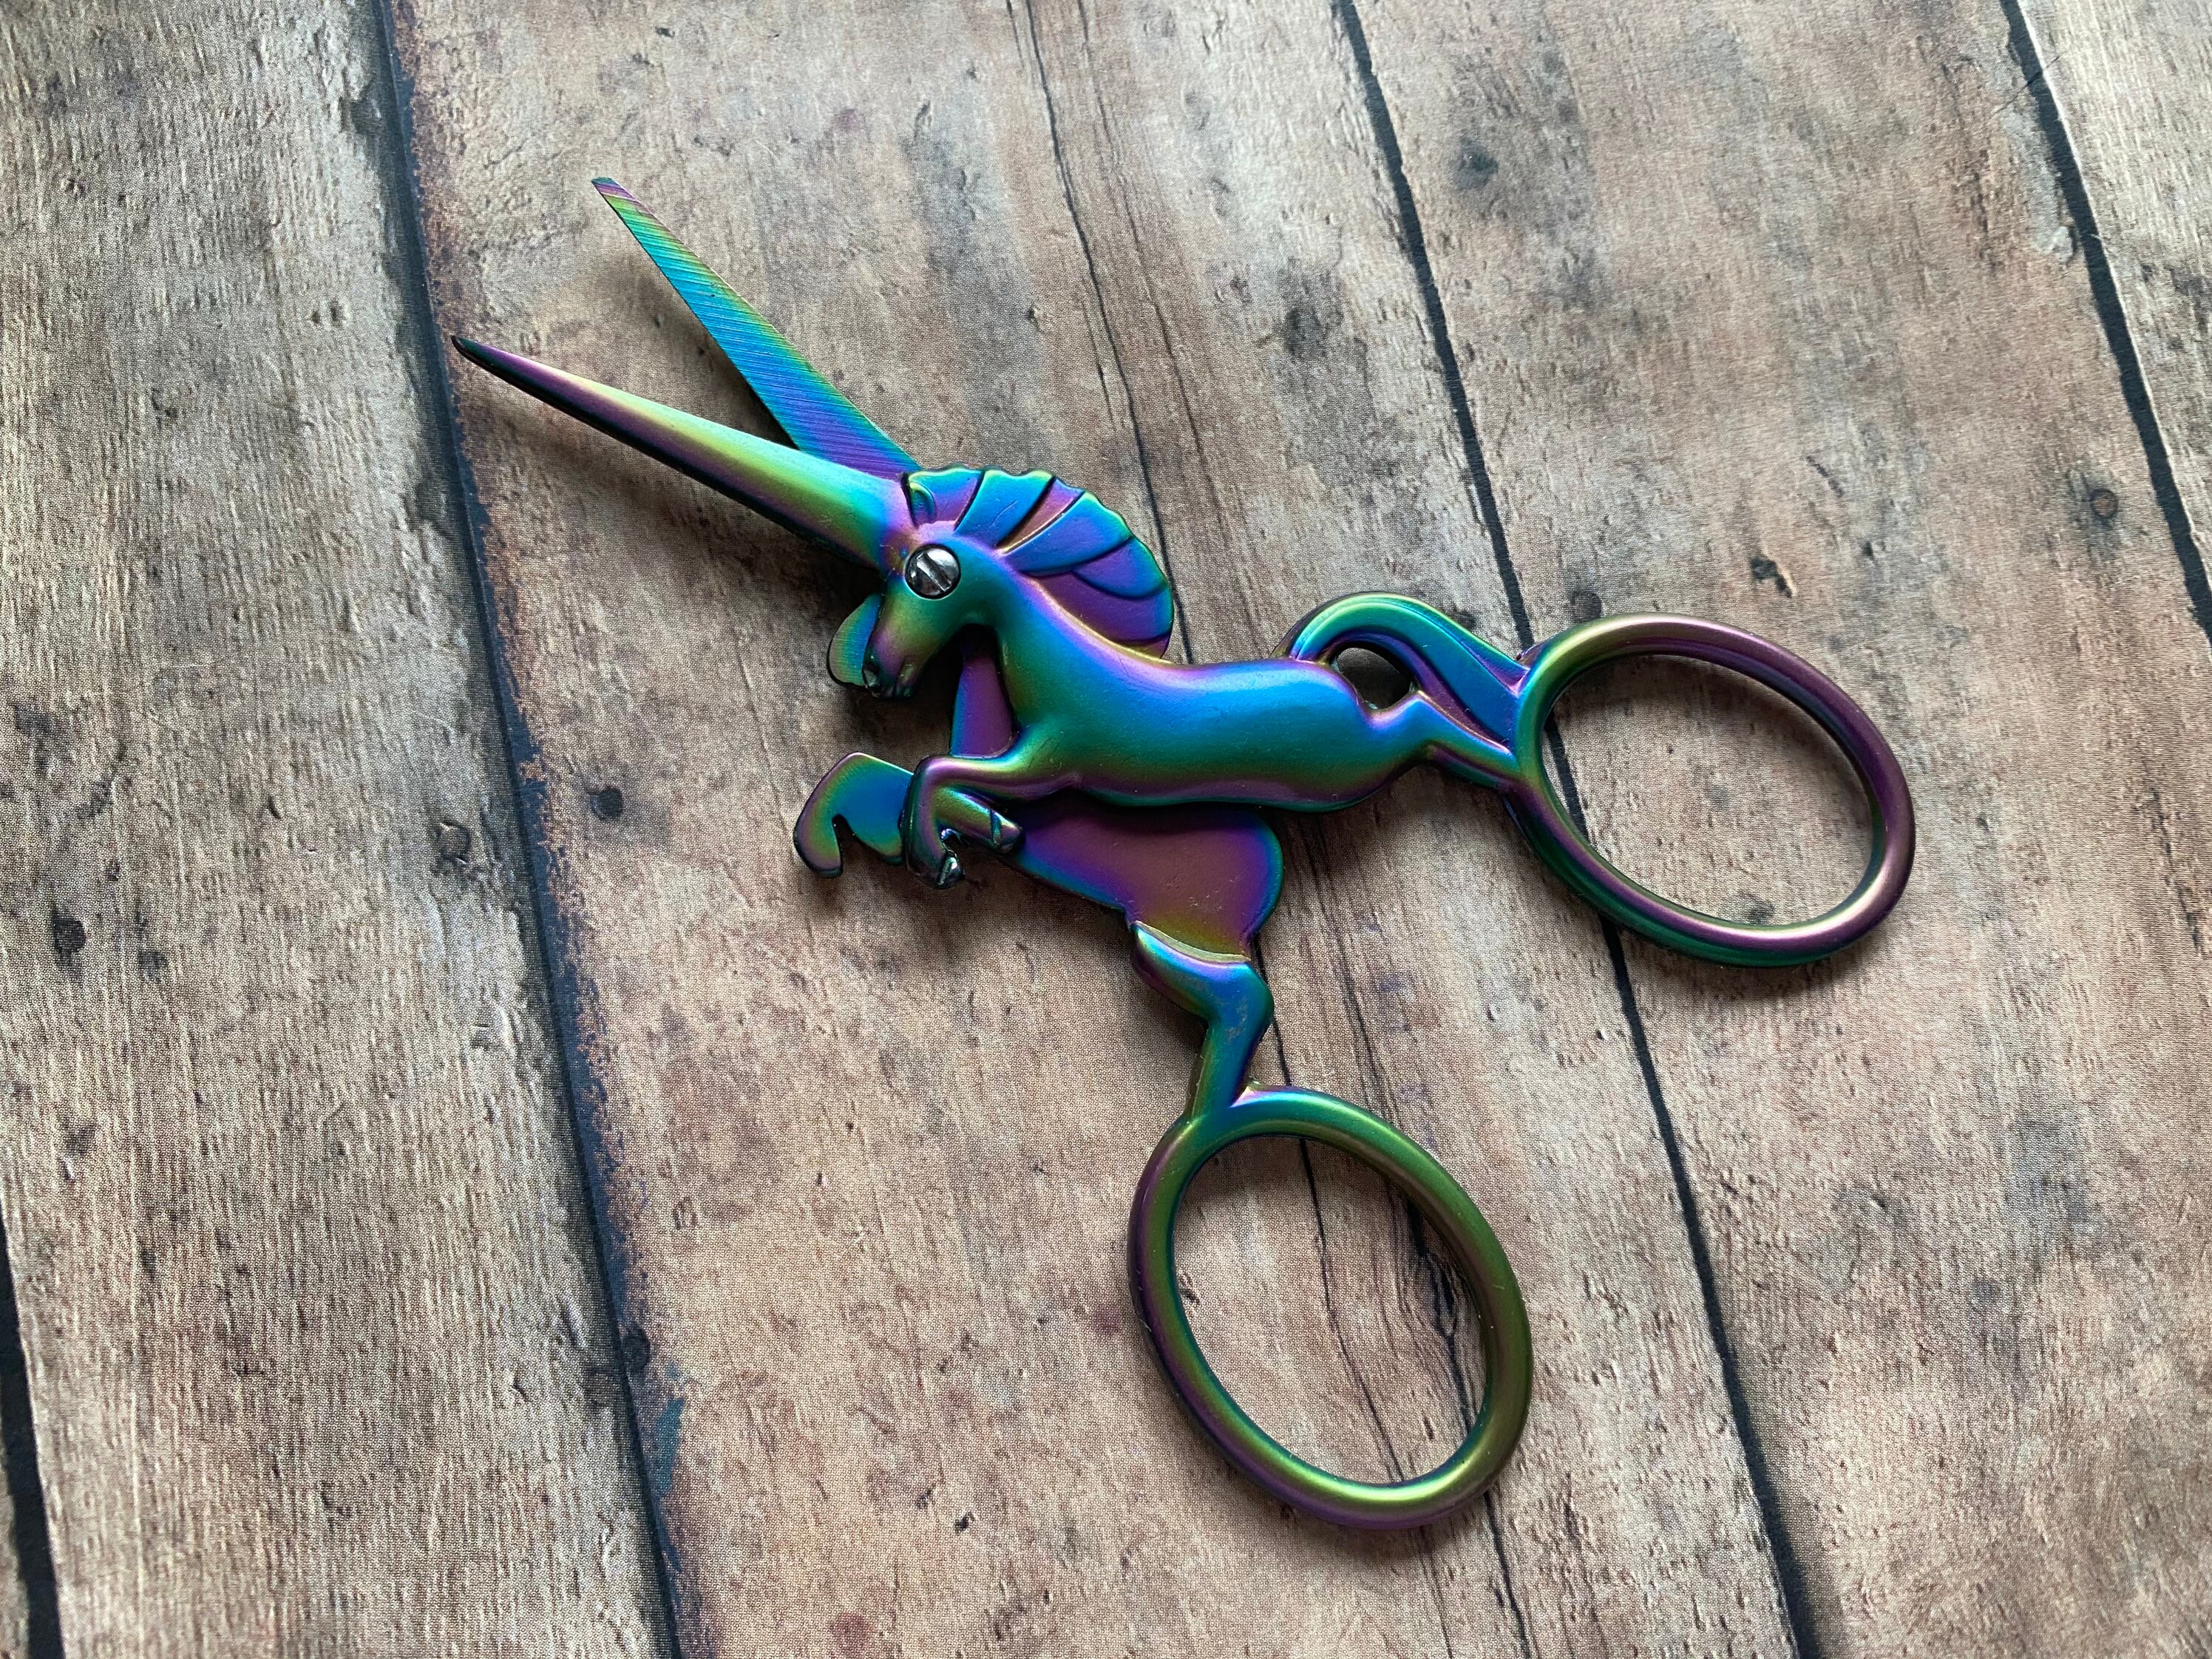 5 Inch Steel Scissors for Fabric Cutter Craft Tailor's Scissors Embroidery  Sewing Scissors Tool Cuts DIY Craft Scrapbooking Tool Paper 